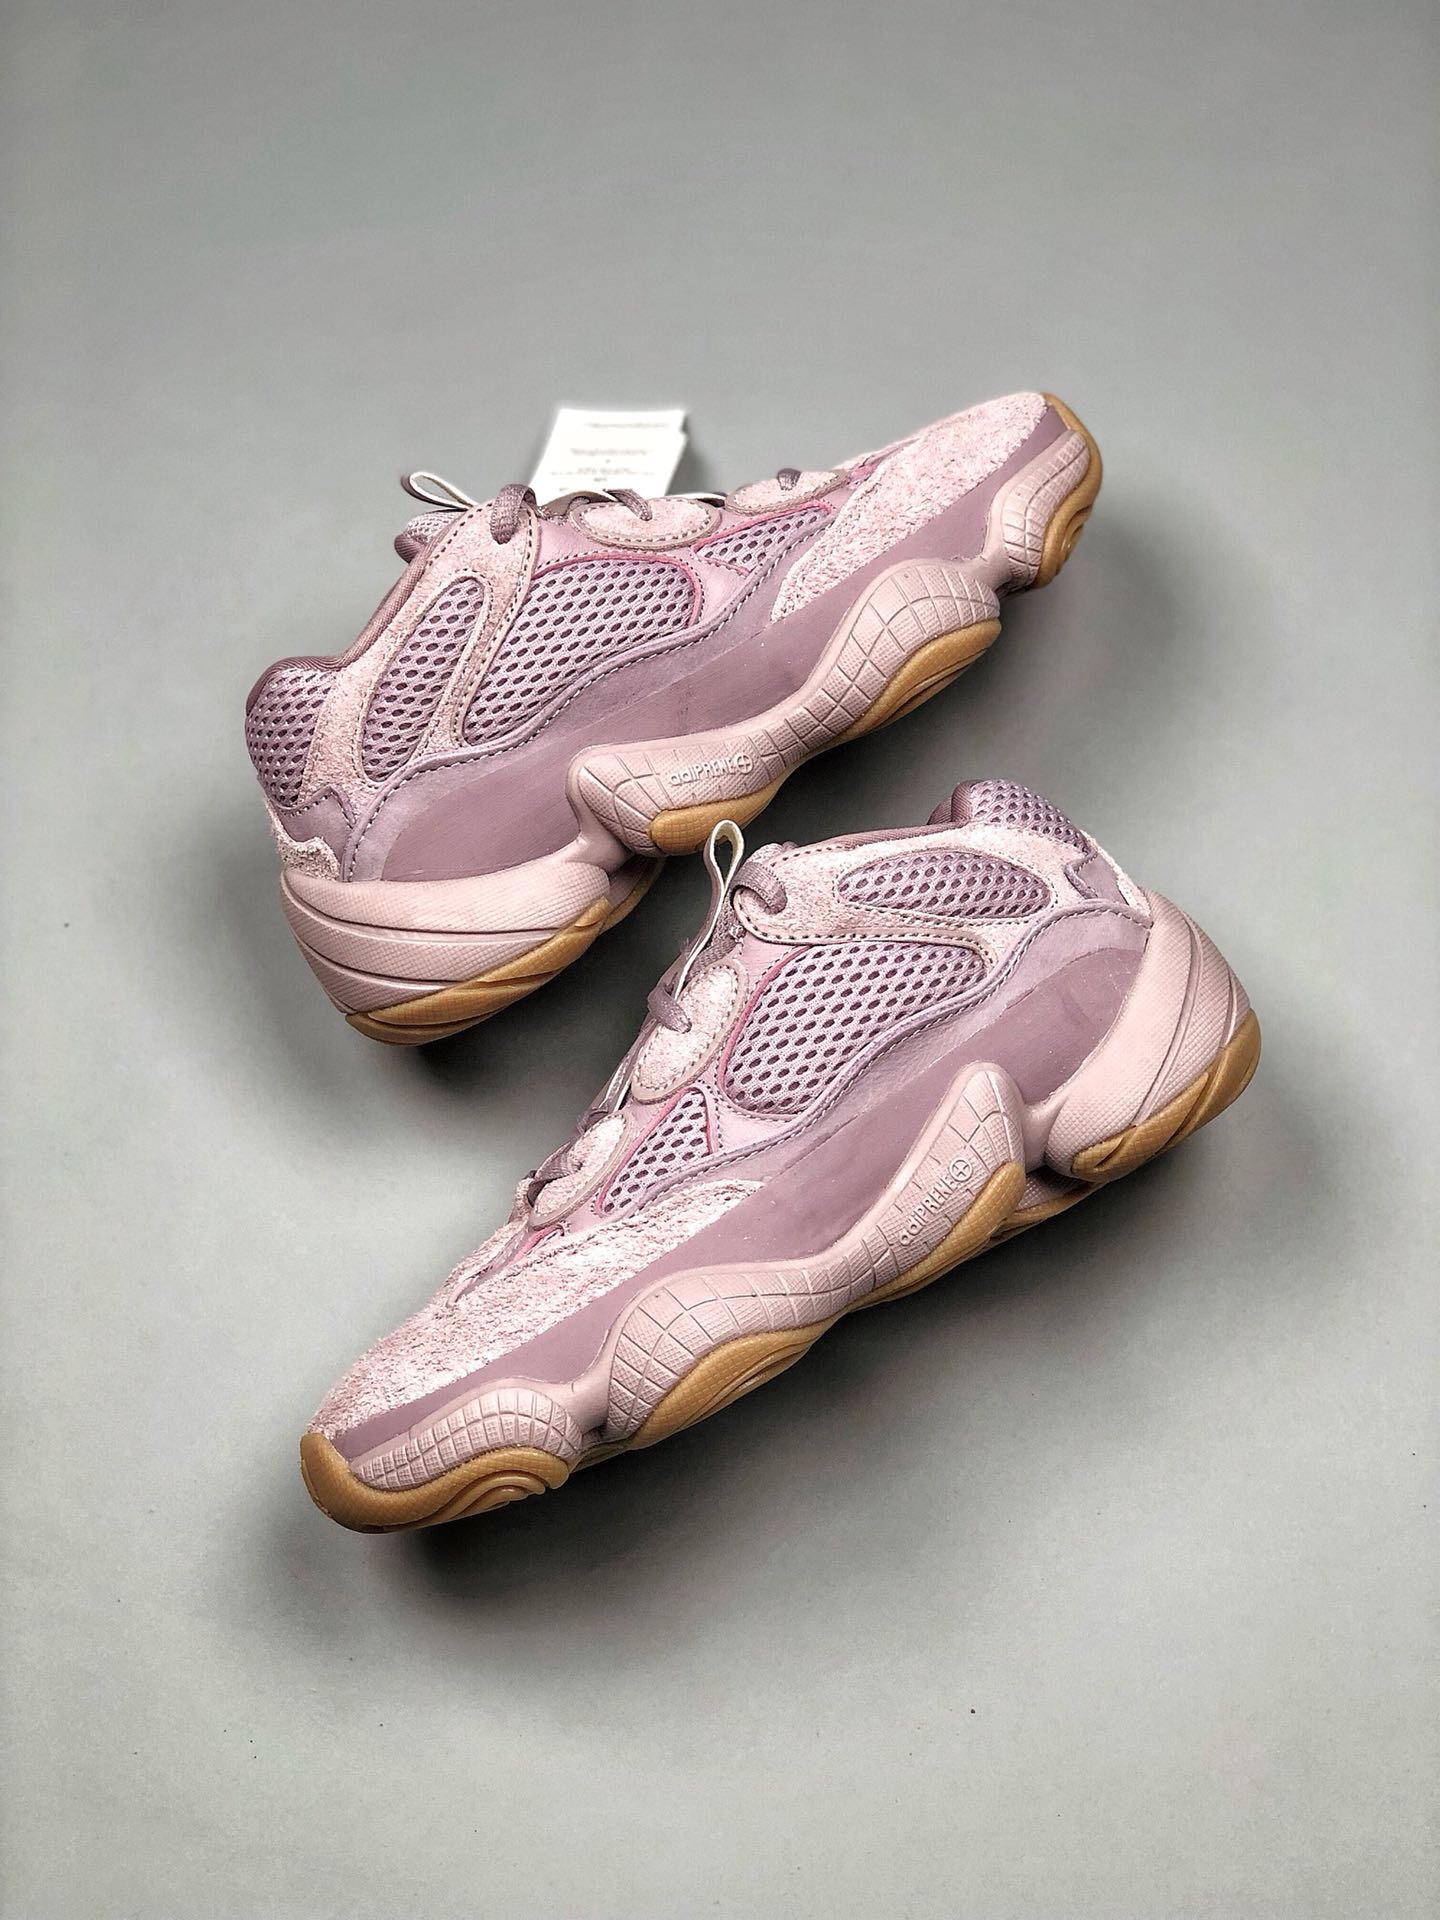 adidas Yeezy 500 “Soft Vision” FW2656 For Sale – Sneaker Hello